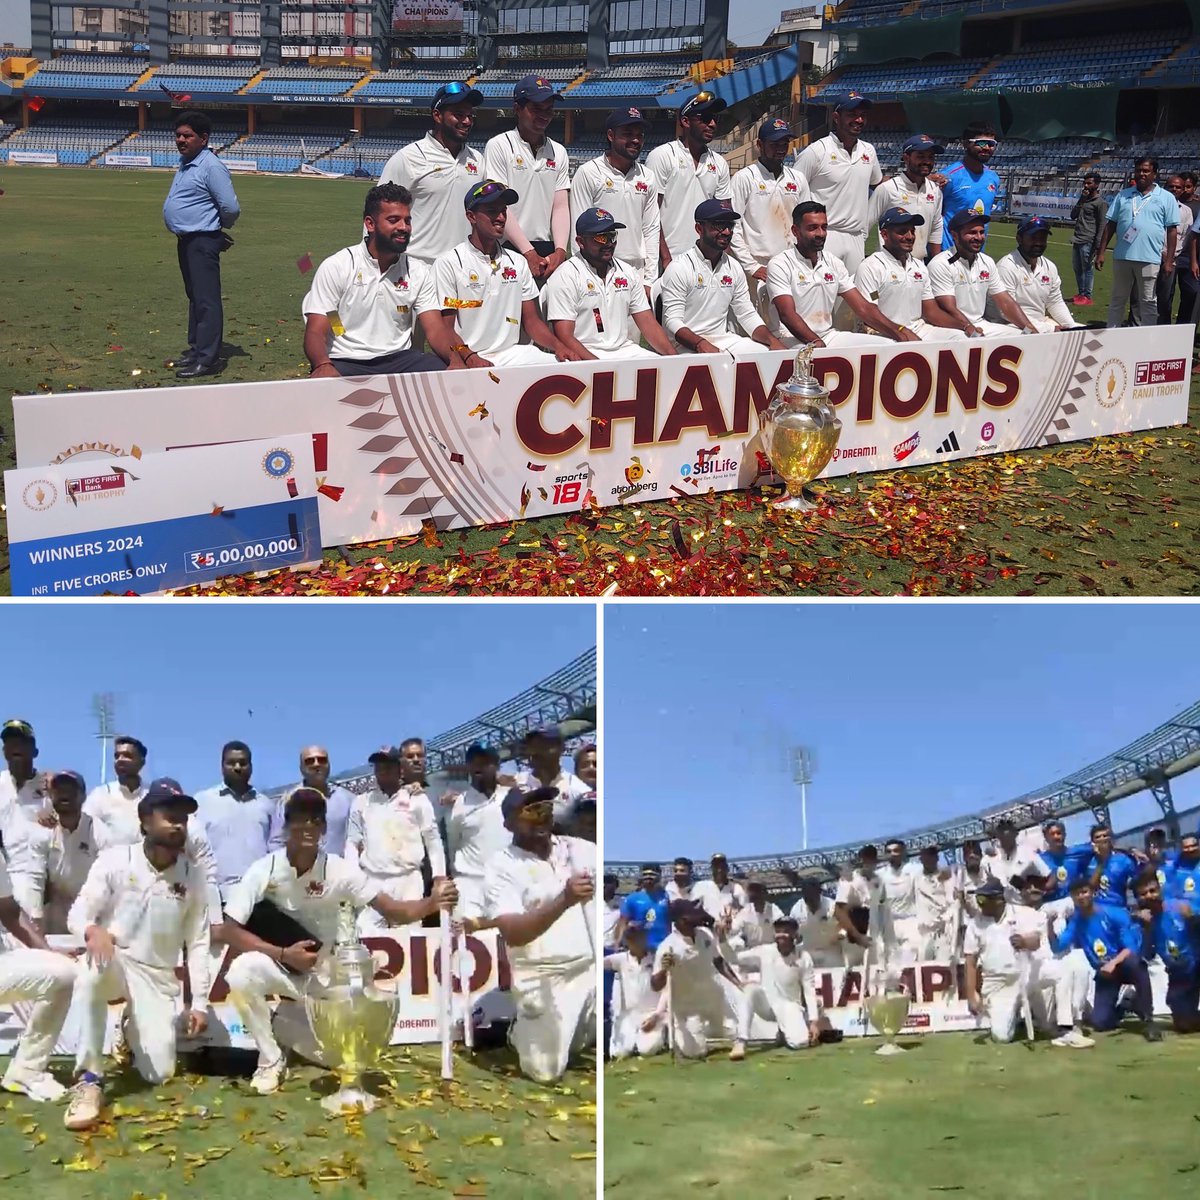 Congratulations to the Mumbai team on historic 42nd Ranji Trophy win 🏆 ! Your perseverance, skill, and teamwork have once again brought glory to Mumbai cricket. Well done, champions! 👏💙🏆 📷: BCCI/GauravGupta #RanjiTrophyFinal #RanjiTrophy #CricketTwitter